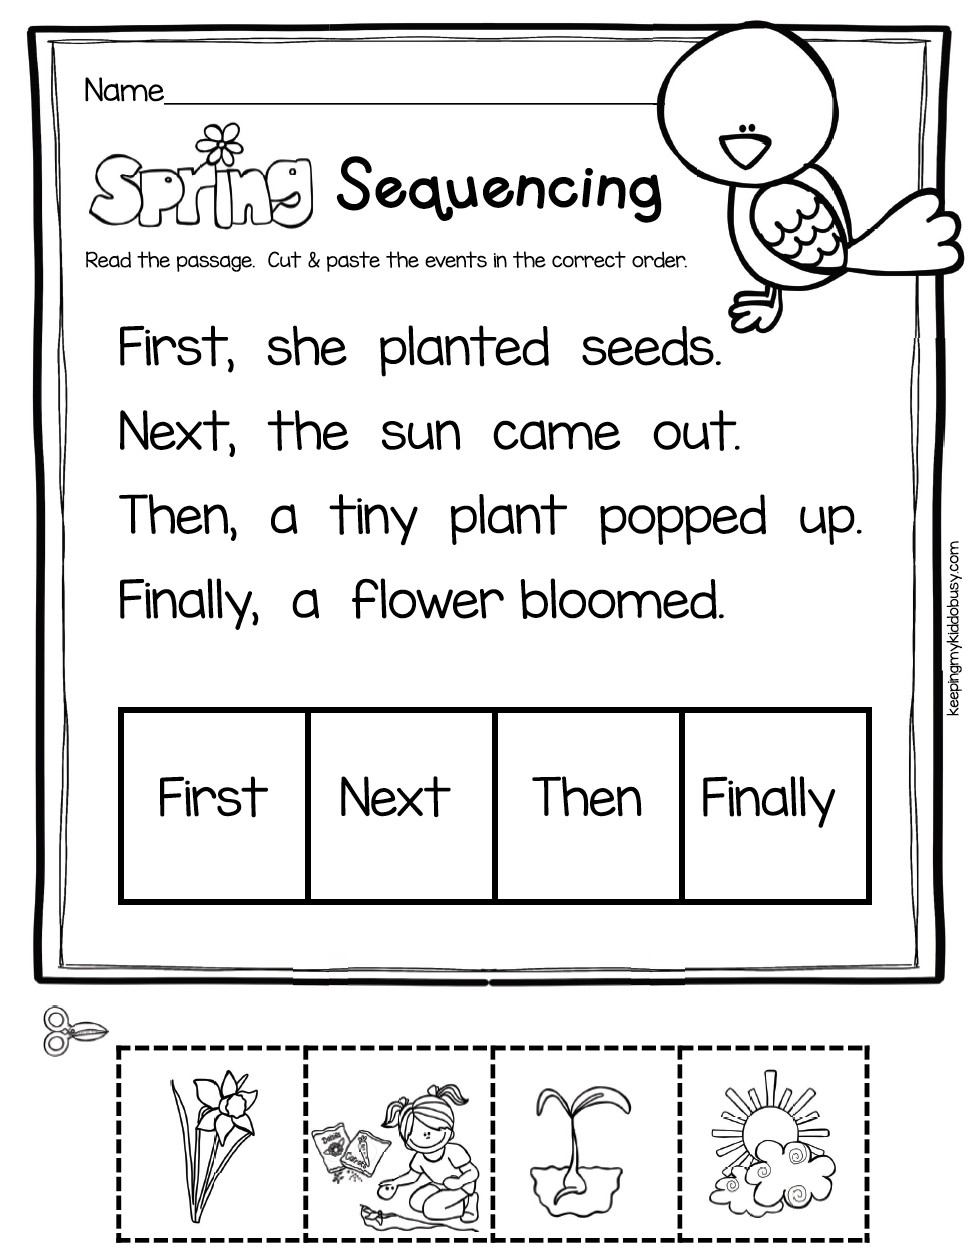 Story Sequence Worksheets for Kindergarten New Sequencing events Worksheet